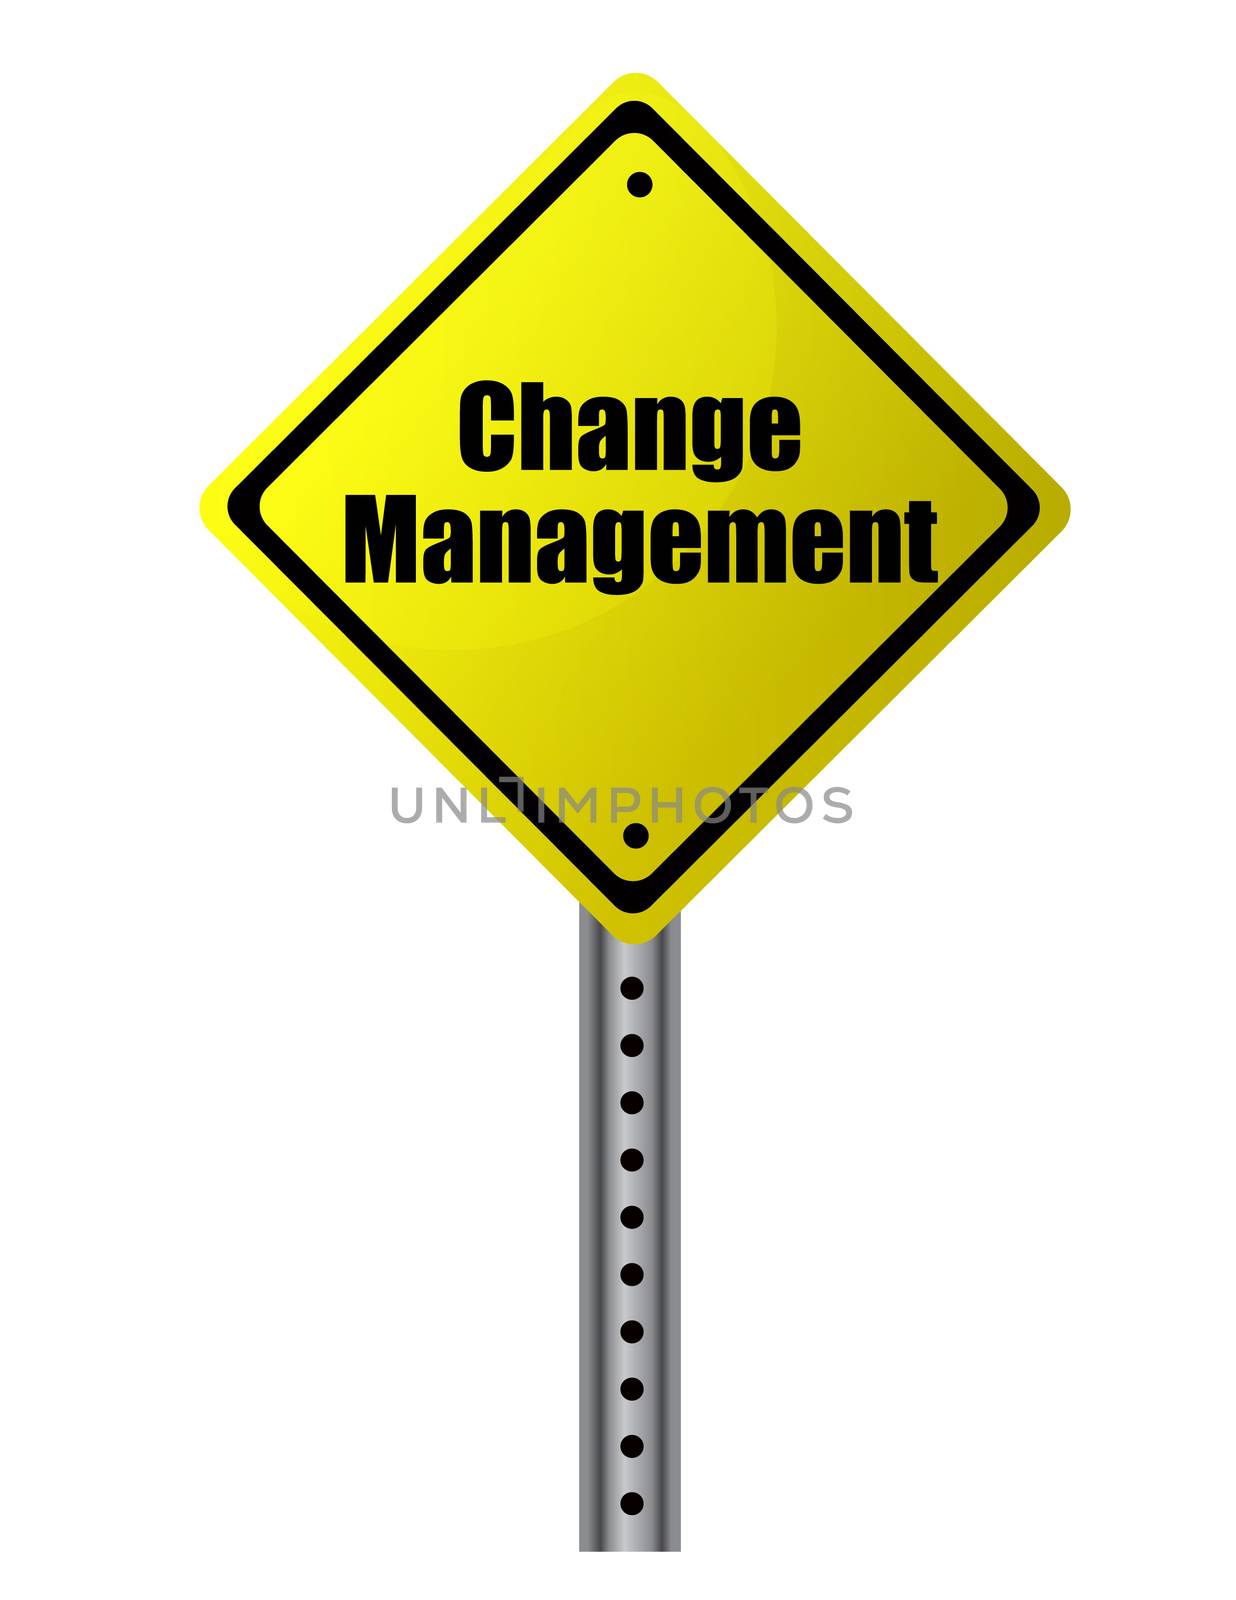 Change management posted on a yellow sign. Vector File available